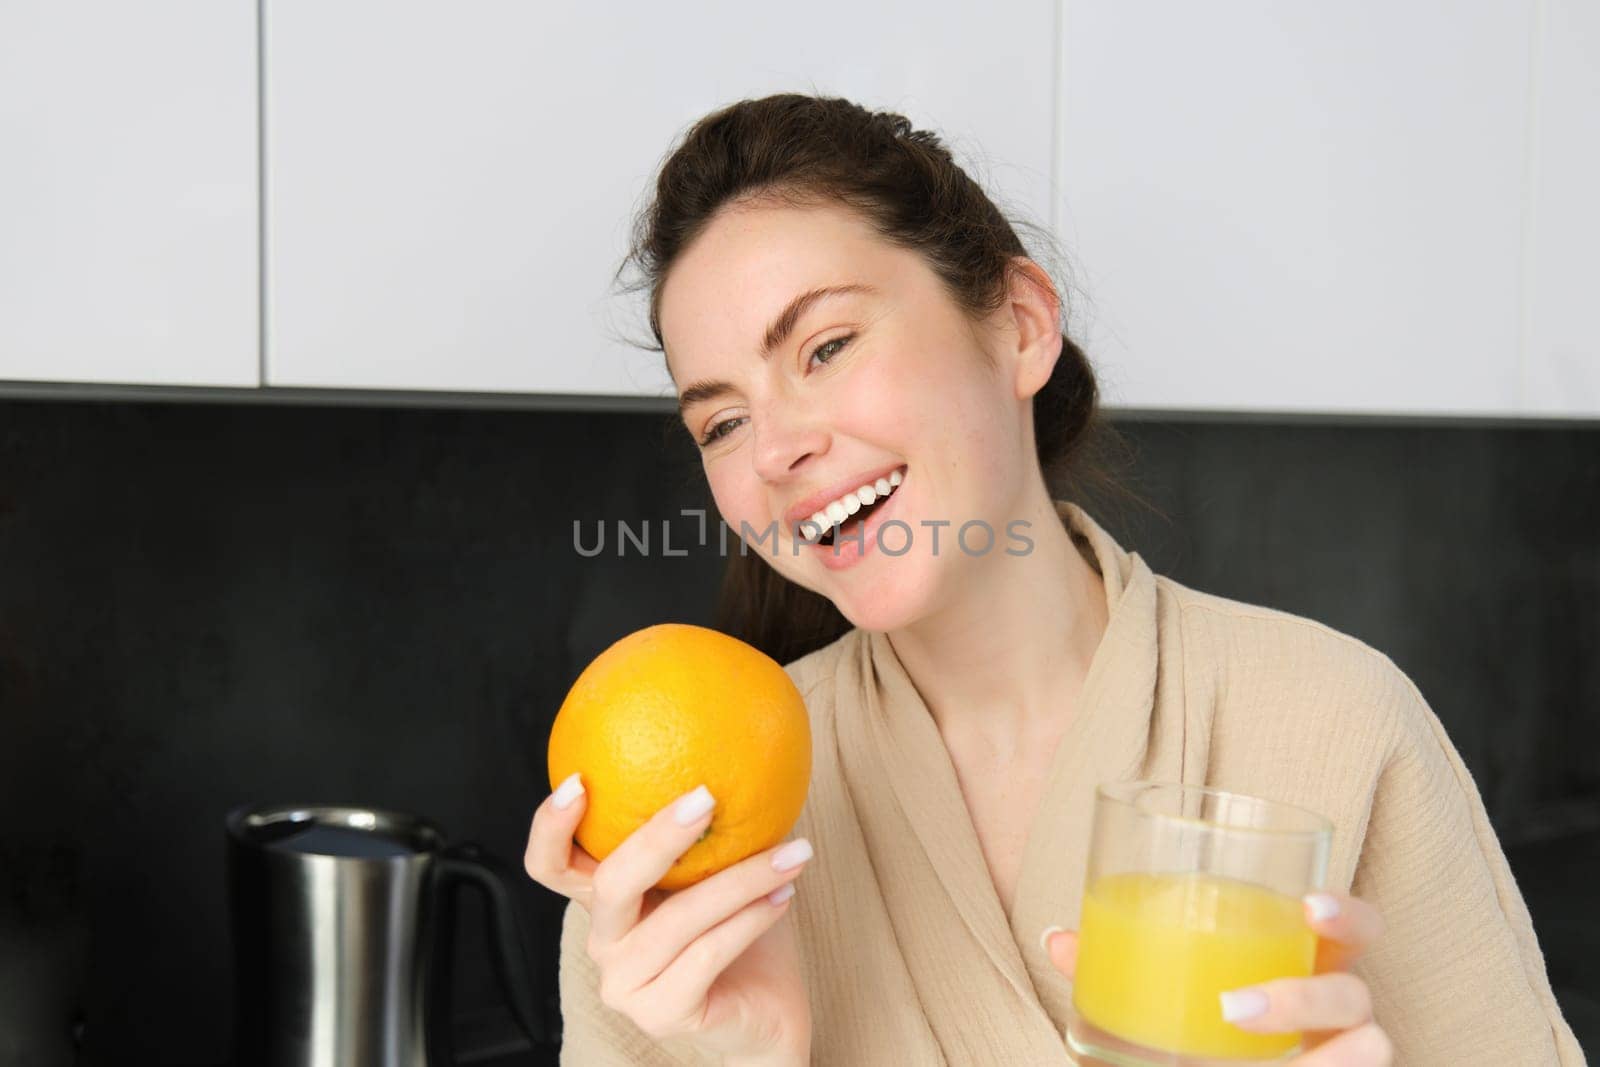 Portrait of attractive young modern woman, posing in kitchen, holding glass of juice and an orange, laughing and talking to someone aside.